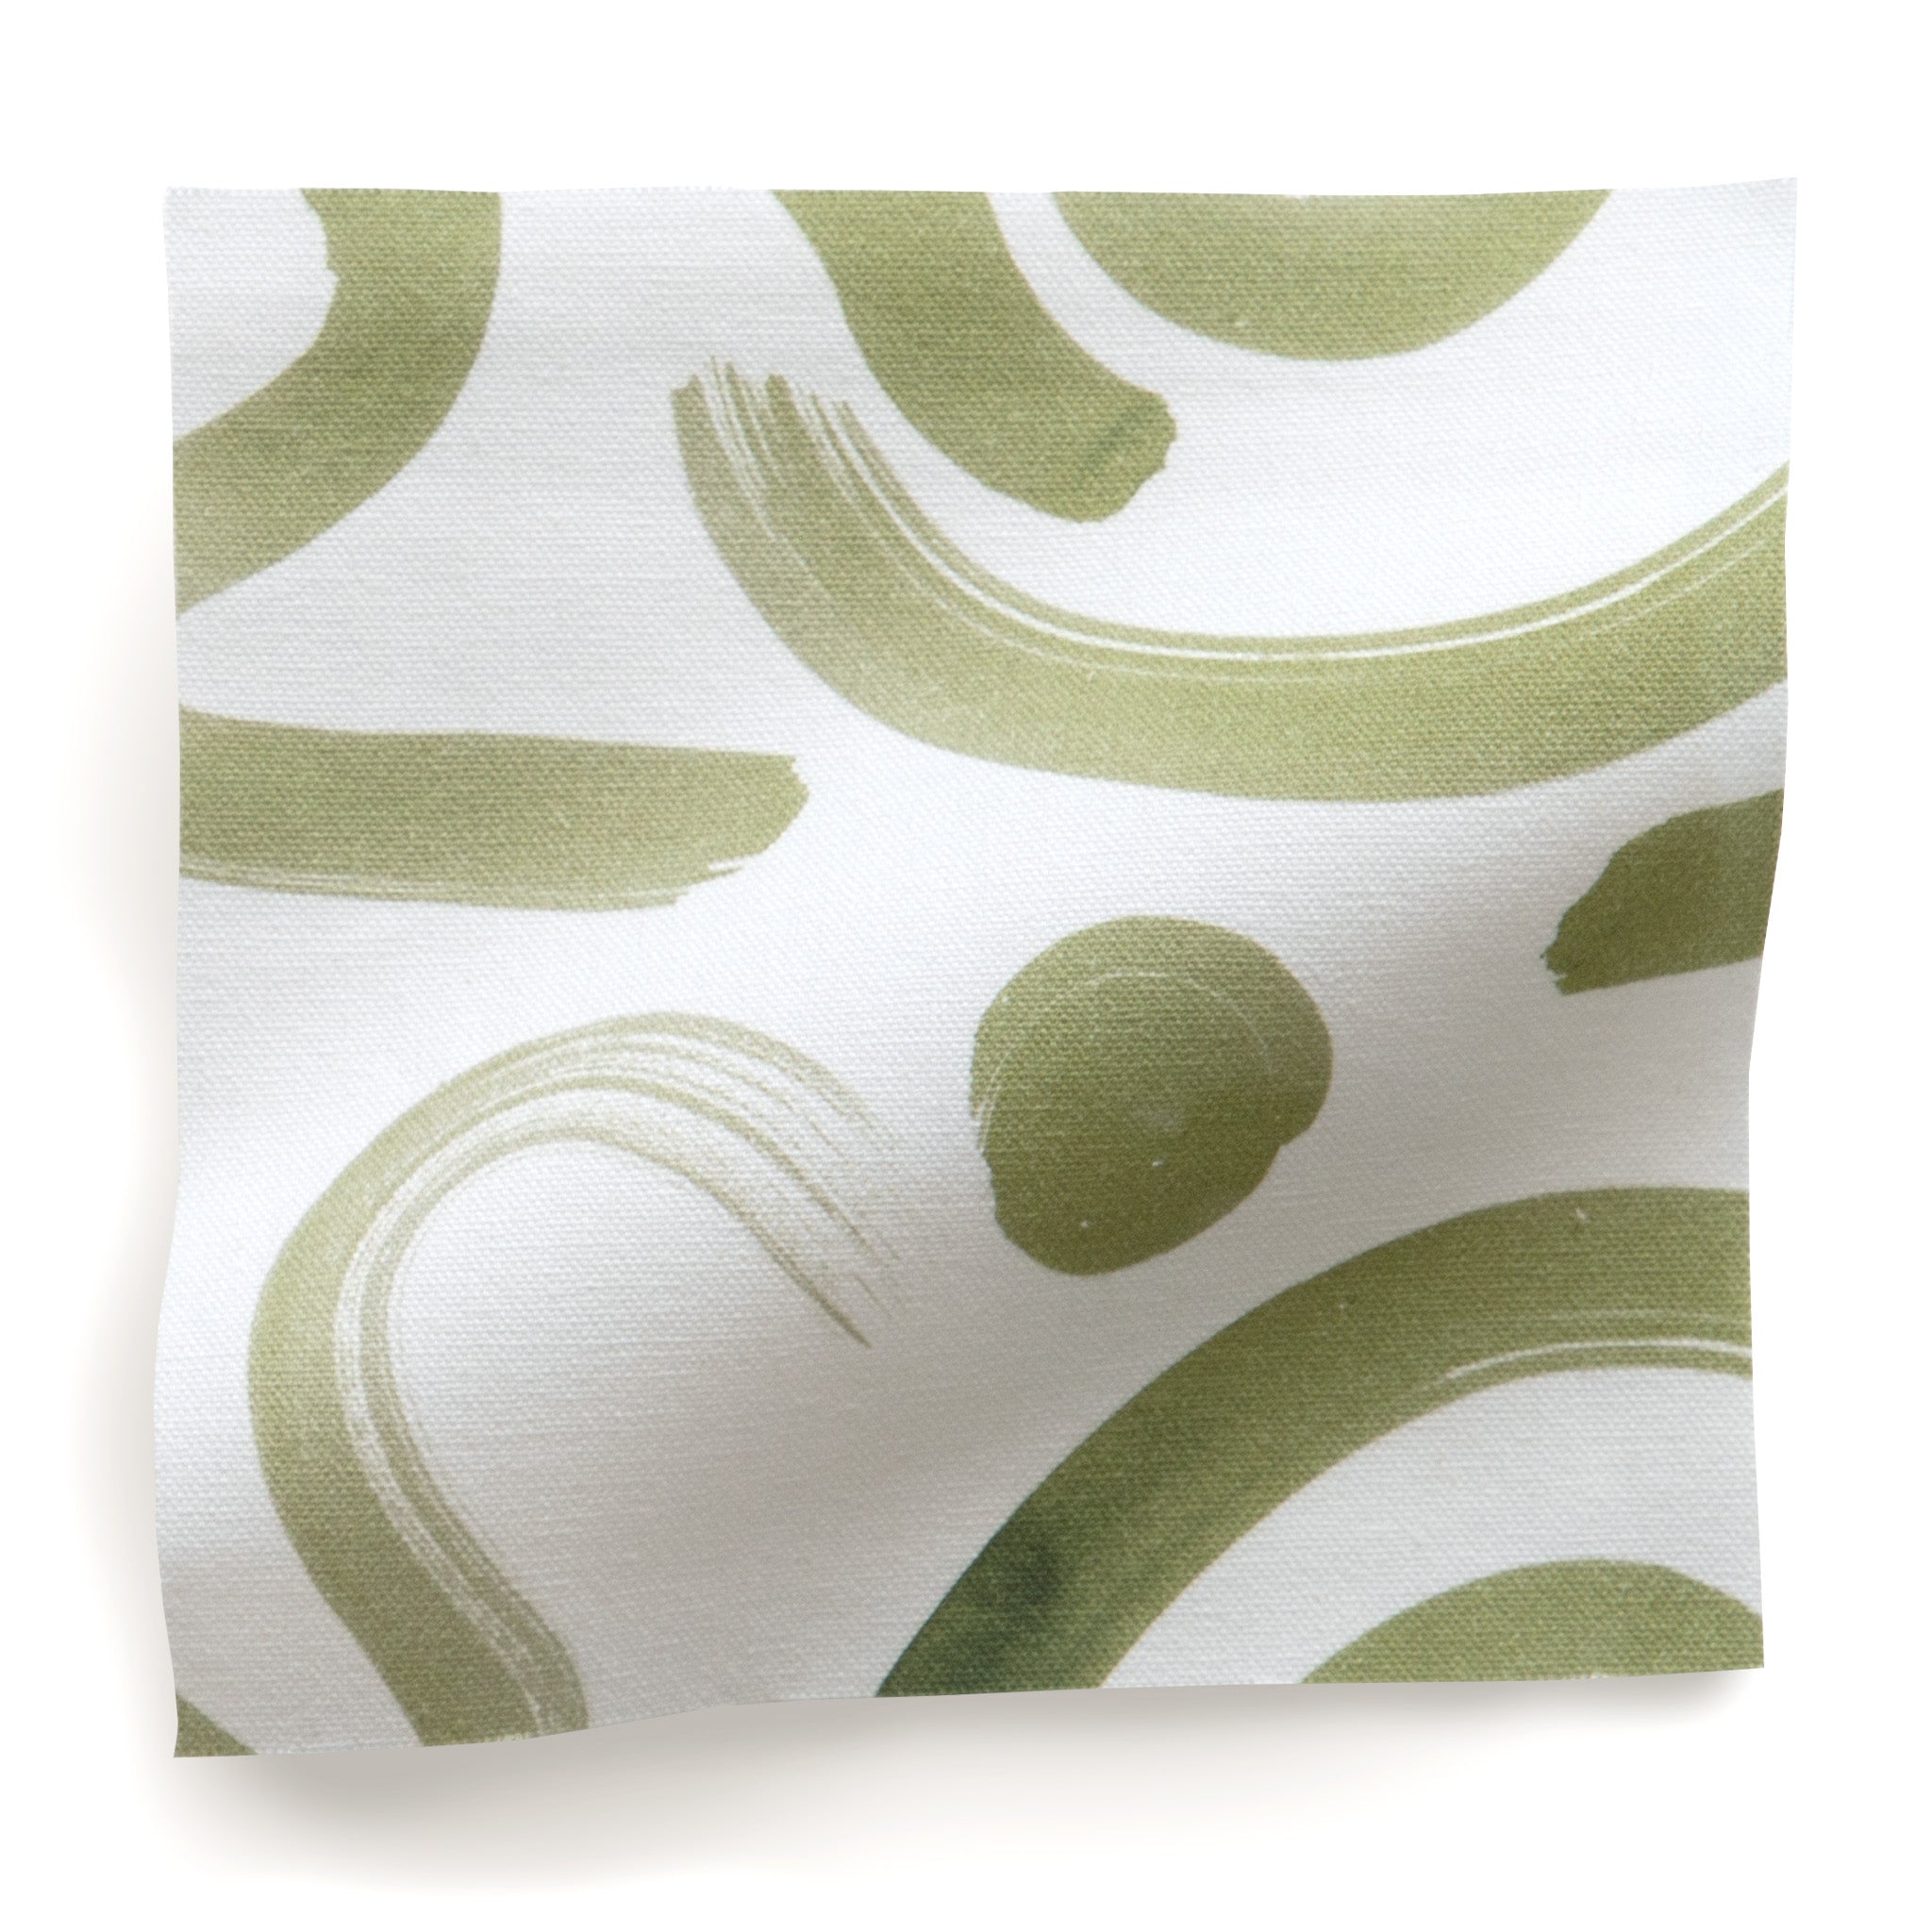 Moss Green Printed Cotton Swatch